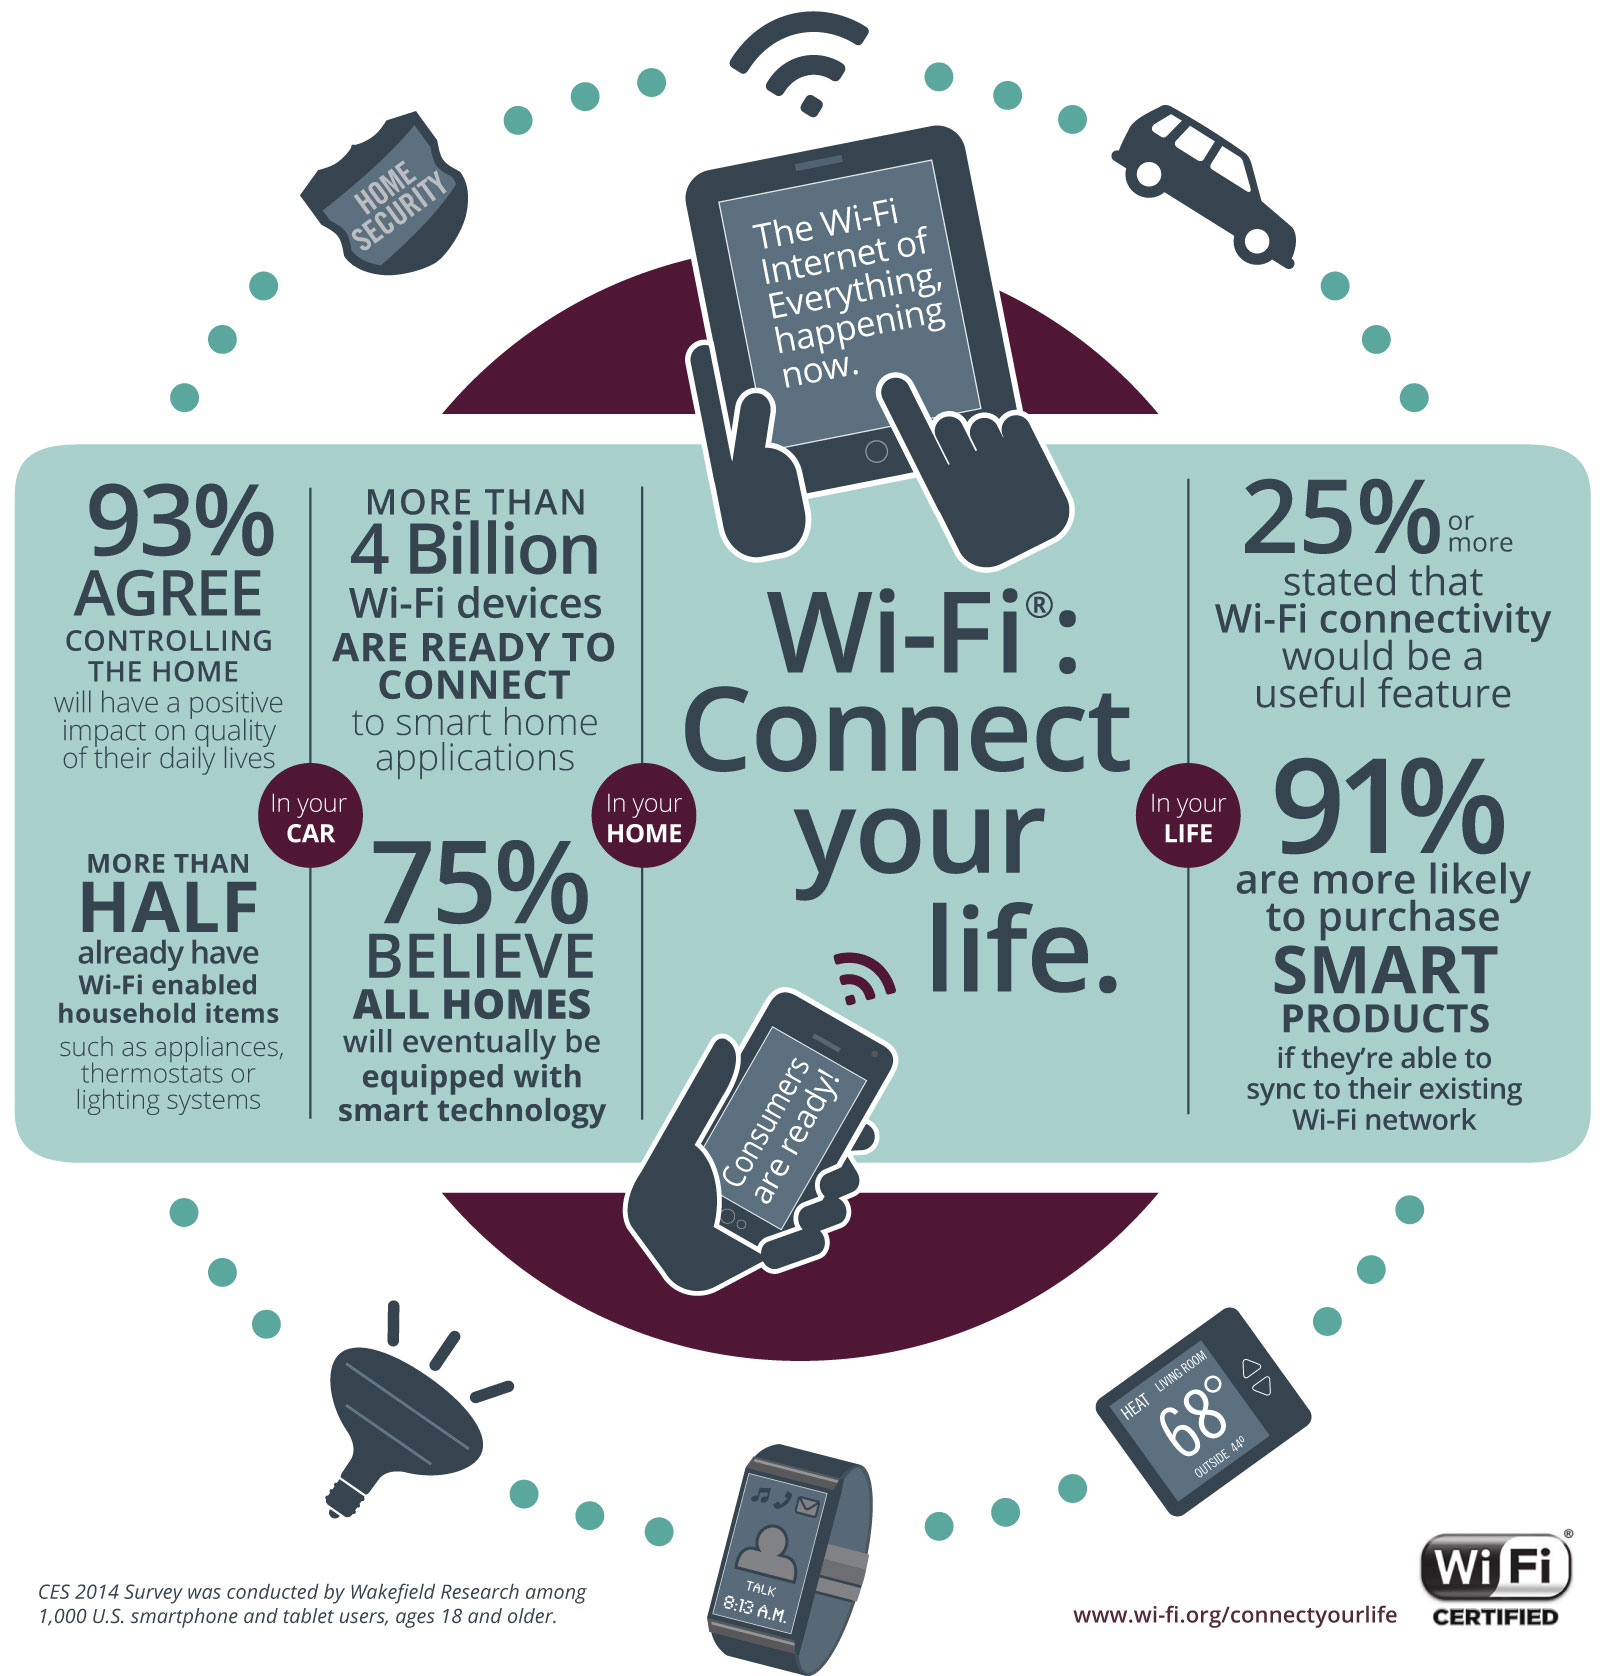 https://www.wi-fi.org/sites/default/files/public/images/Wi-Fi_Connect_your_life.jpg